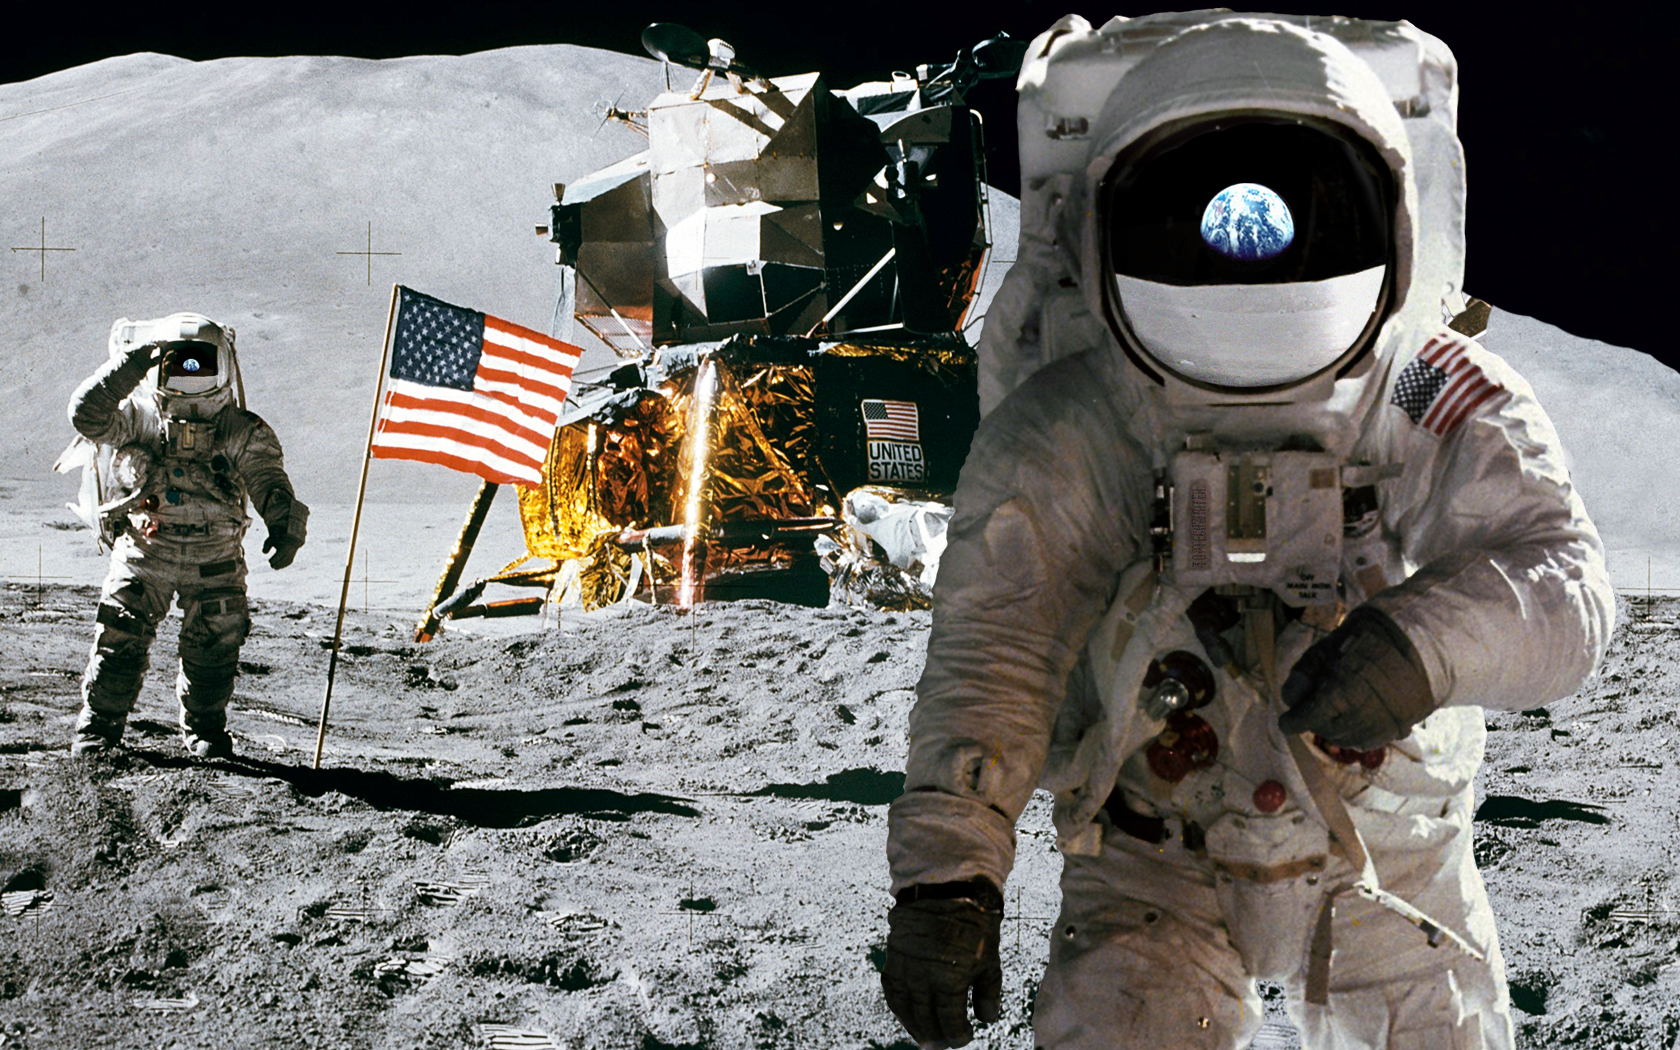 Free download American astronauts on the moon wallpaper and image wallpaper [1680x1050] for your Desktop, Mobile & Tablet. Explore Astronaut Wallpaper. Cool Astronaut Wallpaper, Burning Astronaut Wallpaper, Sloth Astronaut Wallpaper